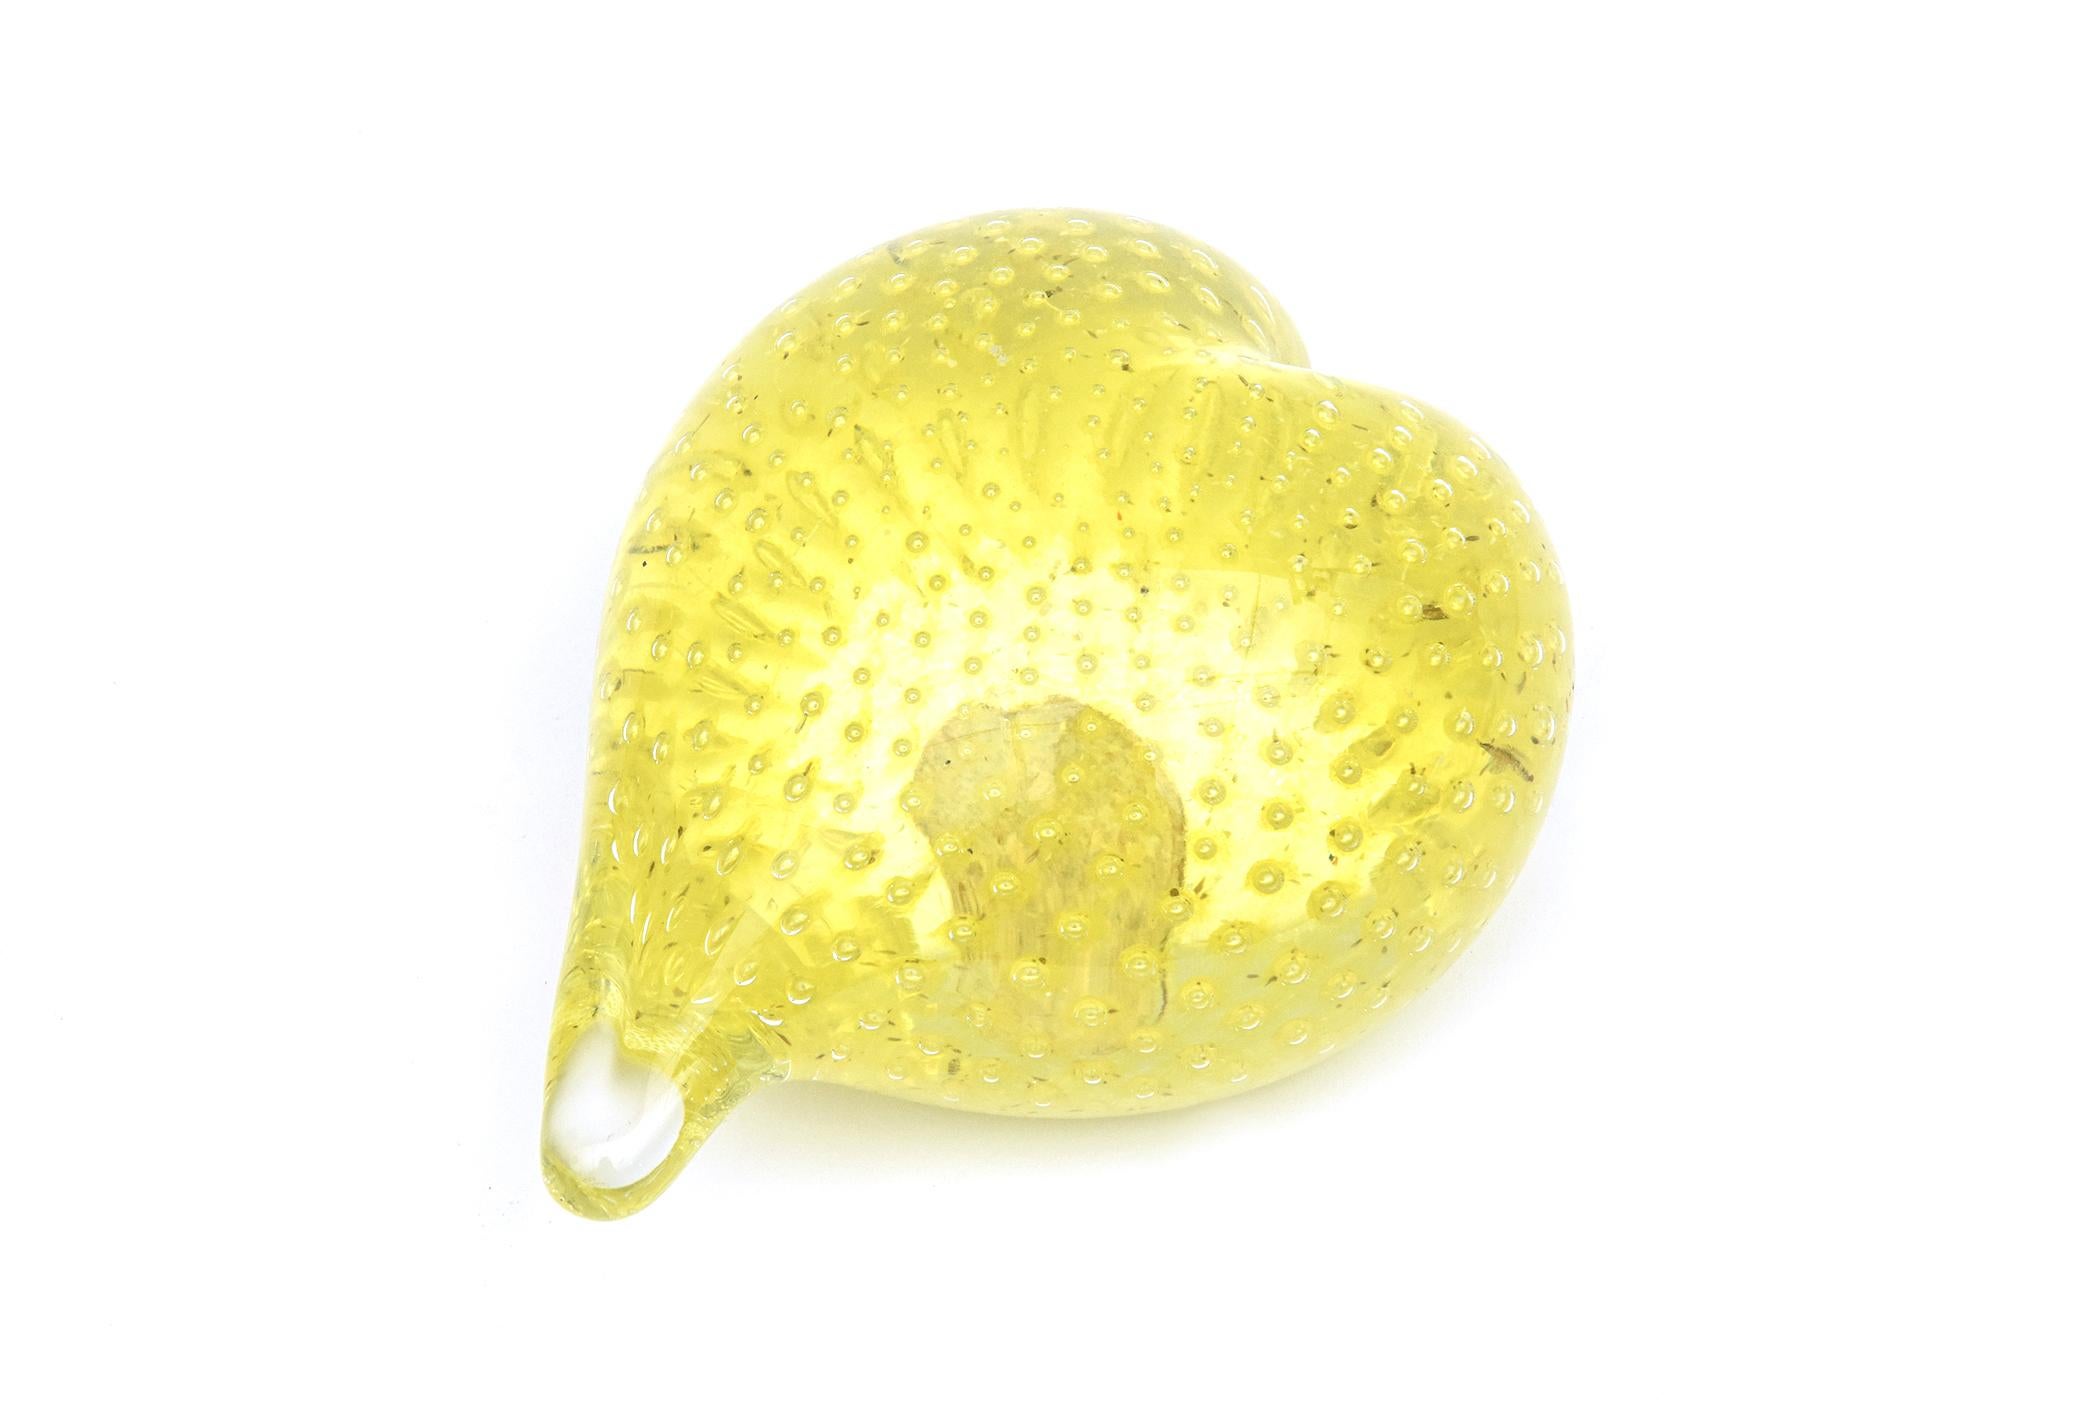 Murano Vintage Yellow Heart Glass With Bubbles Paperweight Desk Accessory For Sale 5